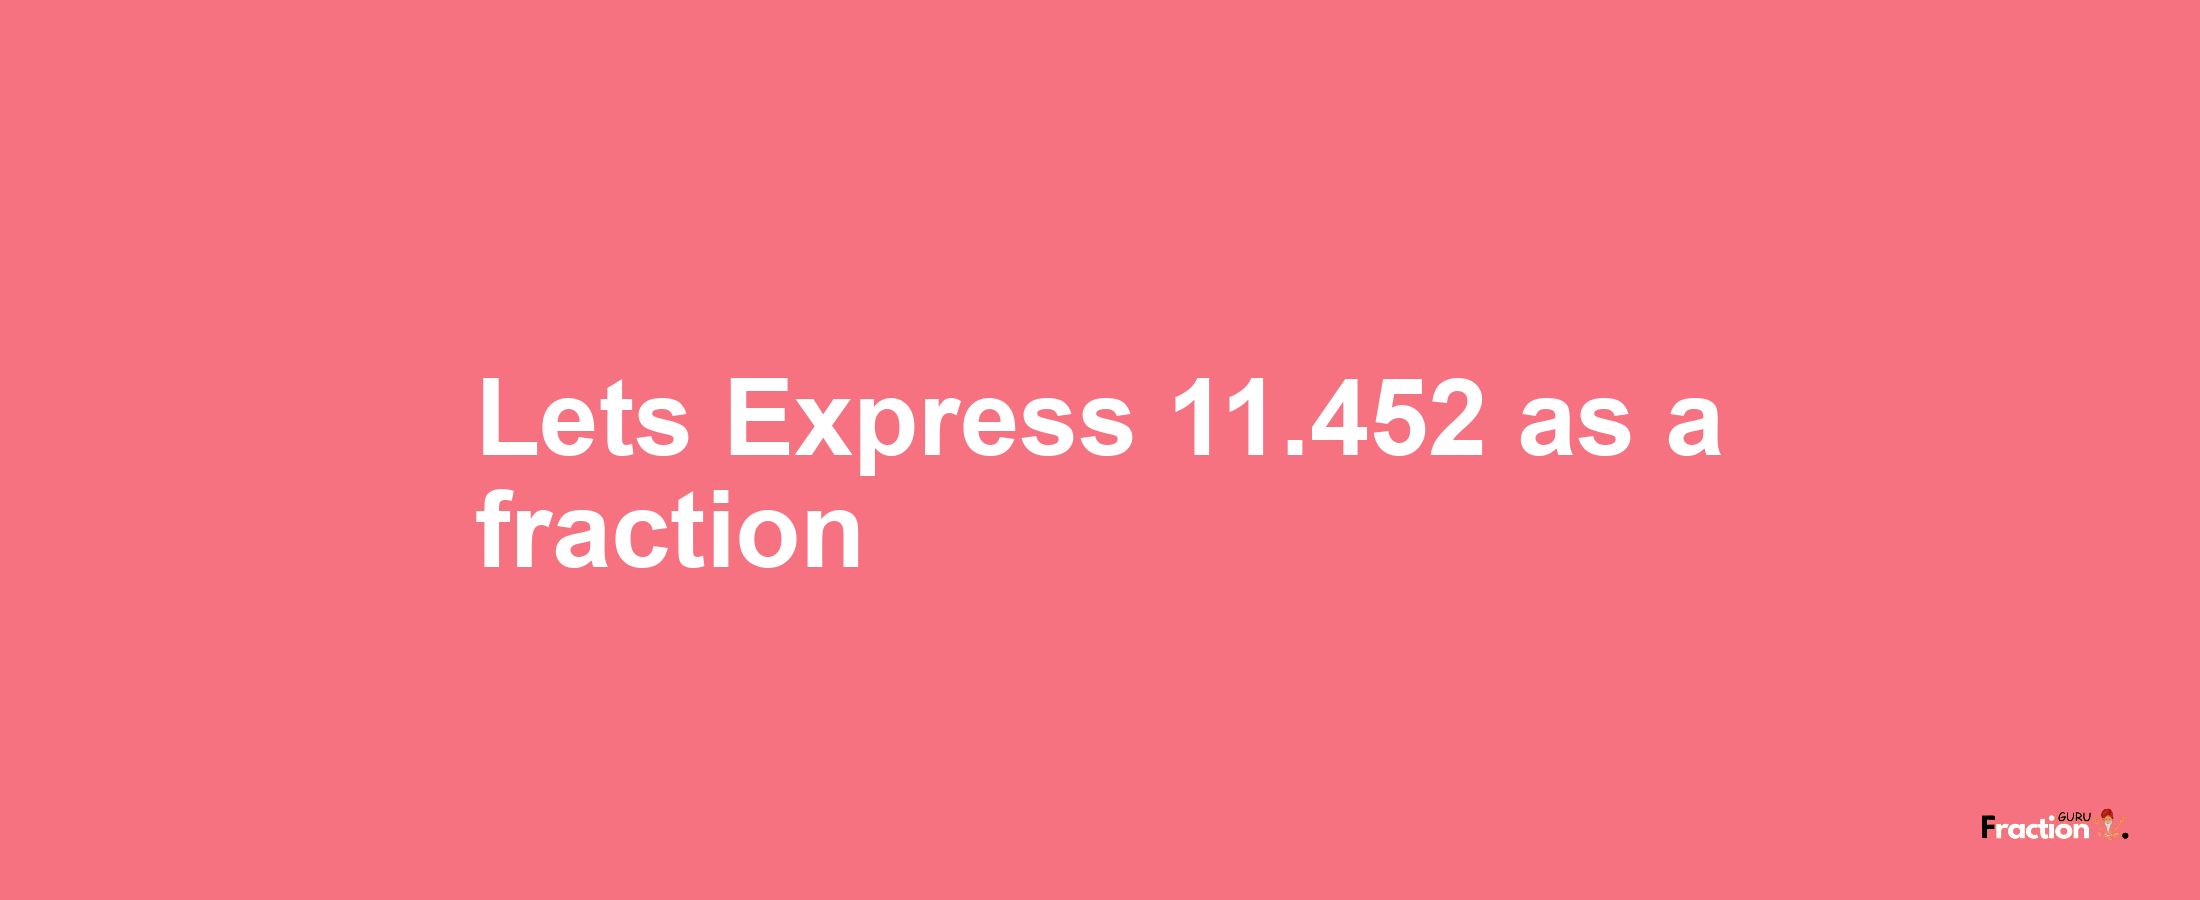 Lets Express 11.452 as afraction